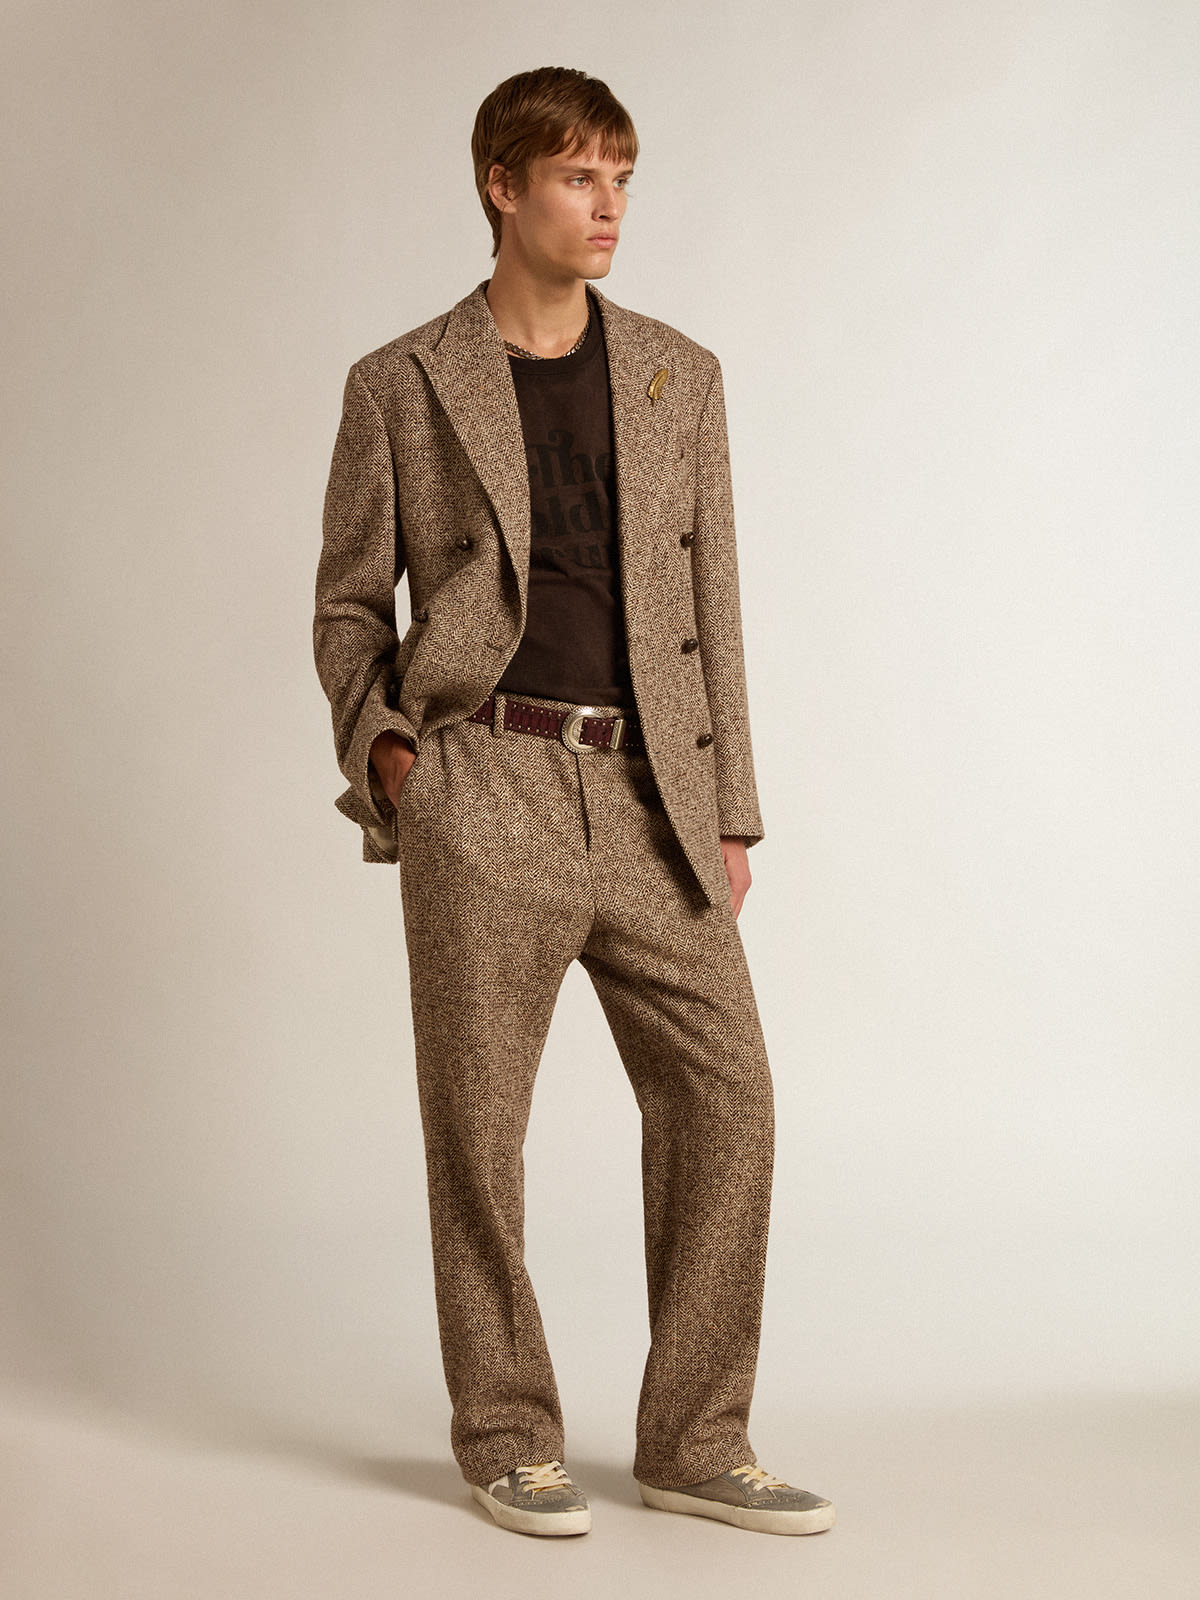 Golden Goose - Men’s pants in beige and brown wool and silk blend fabric in 